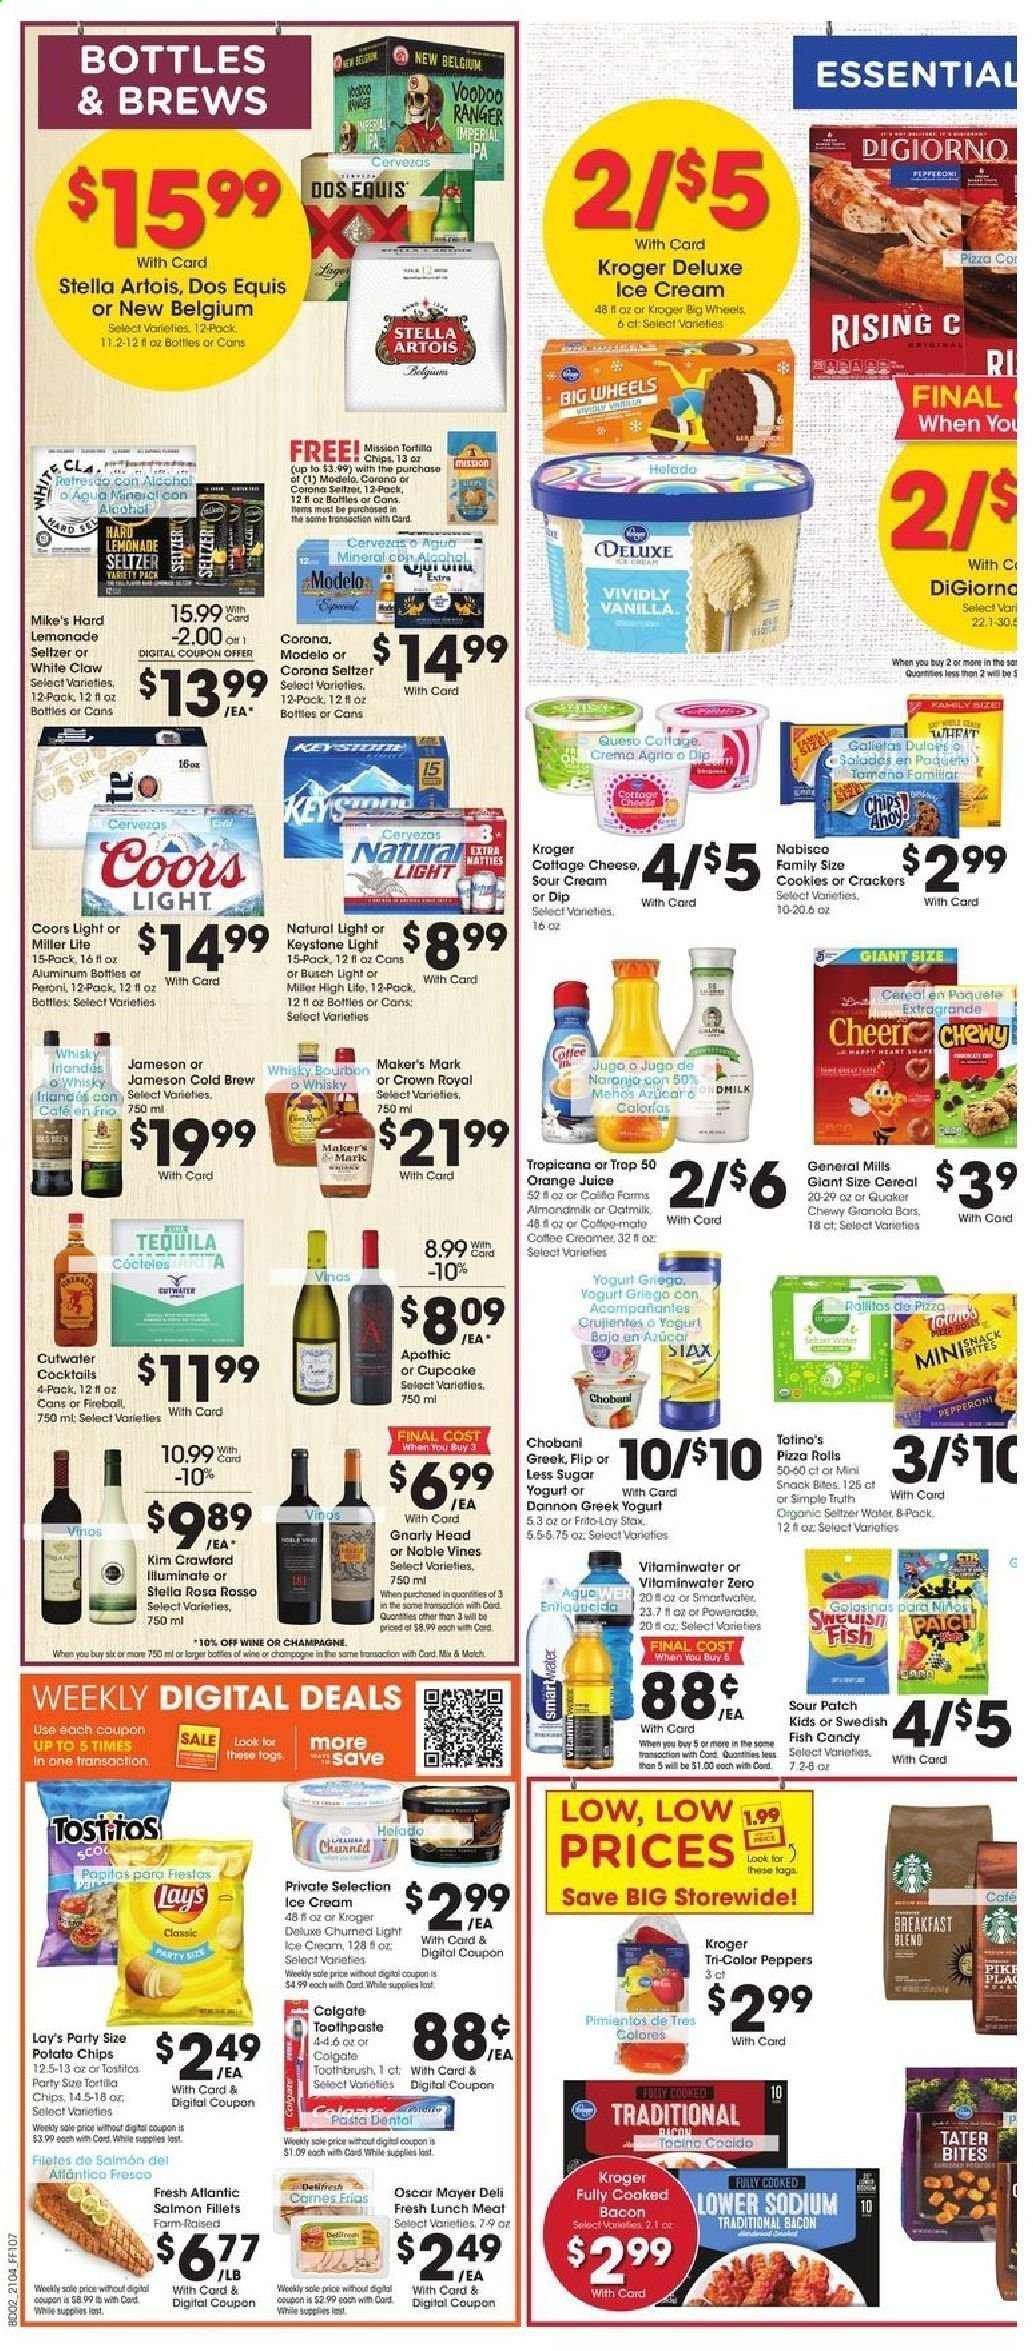 thumbnail - Fry’s Flyer - 02/24/2021 - 03/02/2021 - Sales products - salmon, salmon fillet, northern pike, fish, pizza, Quaker, bacon, Oscar Mayer, pepperoni, lunch meat, cottage cheese, cheese, greek yoghurt, yoghurt, Chobani, Dannon, almond milk, oat milk, sour cream, dip, ice cream, cookies, crackers, Sour Patch, potato chips, chips, snack, Lay’s, Frito-Lay, Tostitos, cereals, granola bar, pasta, lemonade, Powerade, orange juice, juice, seltzer water, coffee, breakfast blend, champagne, wine, alcohol, bourbon, tequila, whiskey, Jameson, White Claw, beer, Miller Lite, Stella Artois, Coors, Dos Equis, Busch, Corona Extra, Peroni, Keystone, Modelo, Colgate, toothbrush, toothpaste. Page 4.